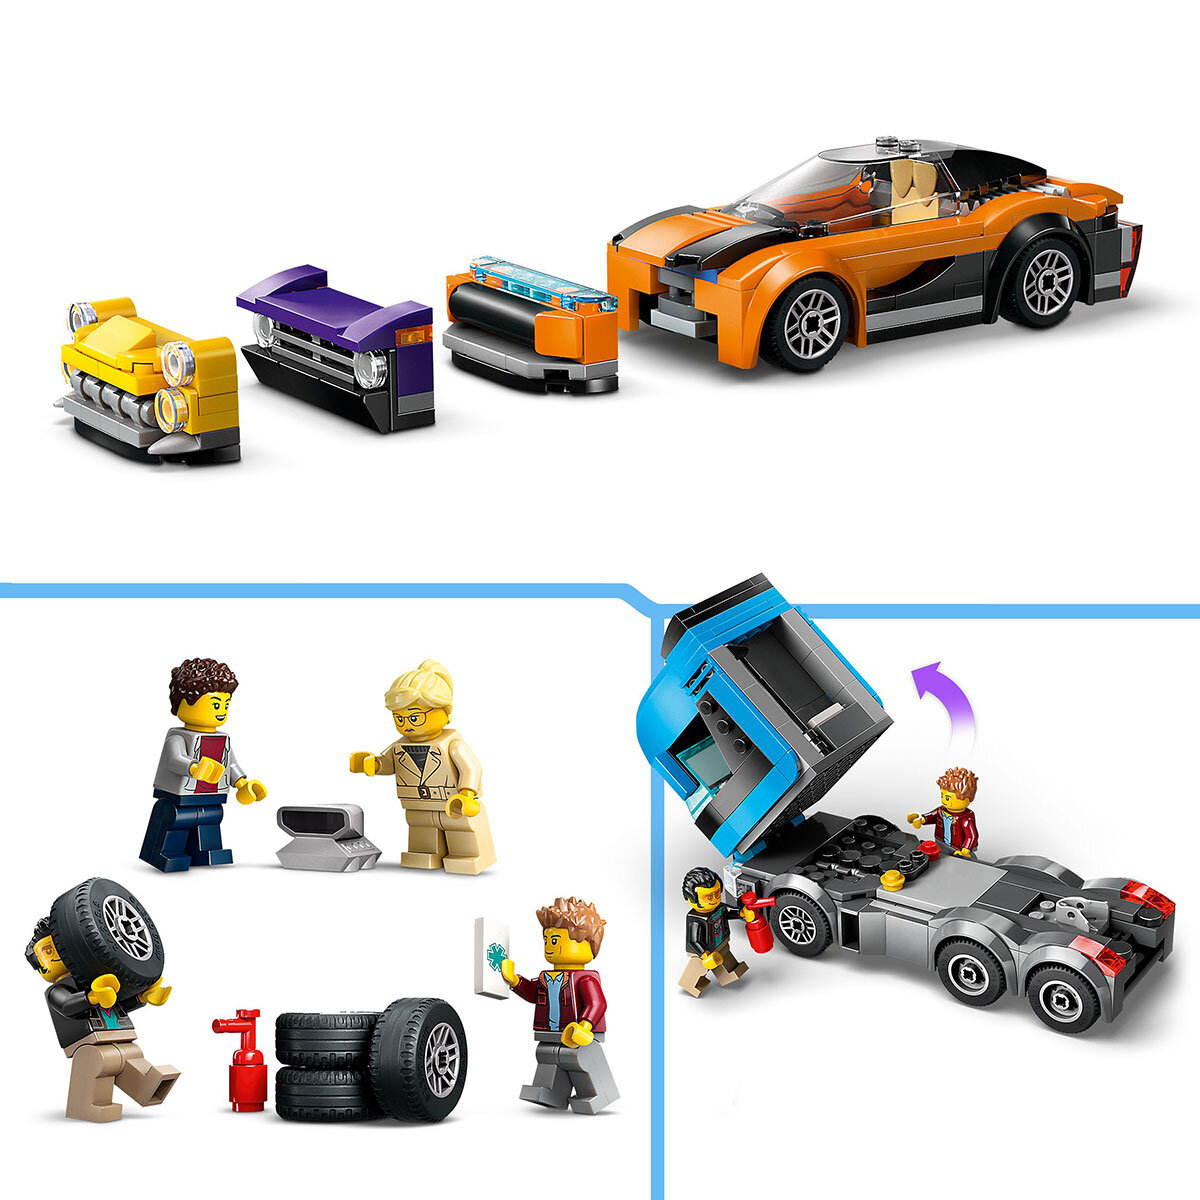 Lego City Car Transporter Truck with Sports Cars Item Image